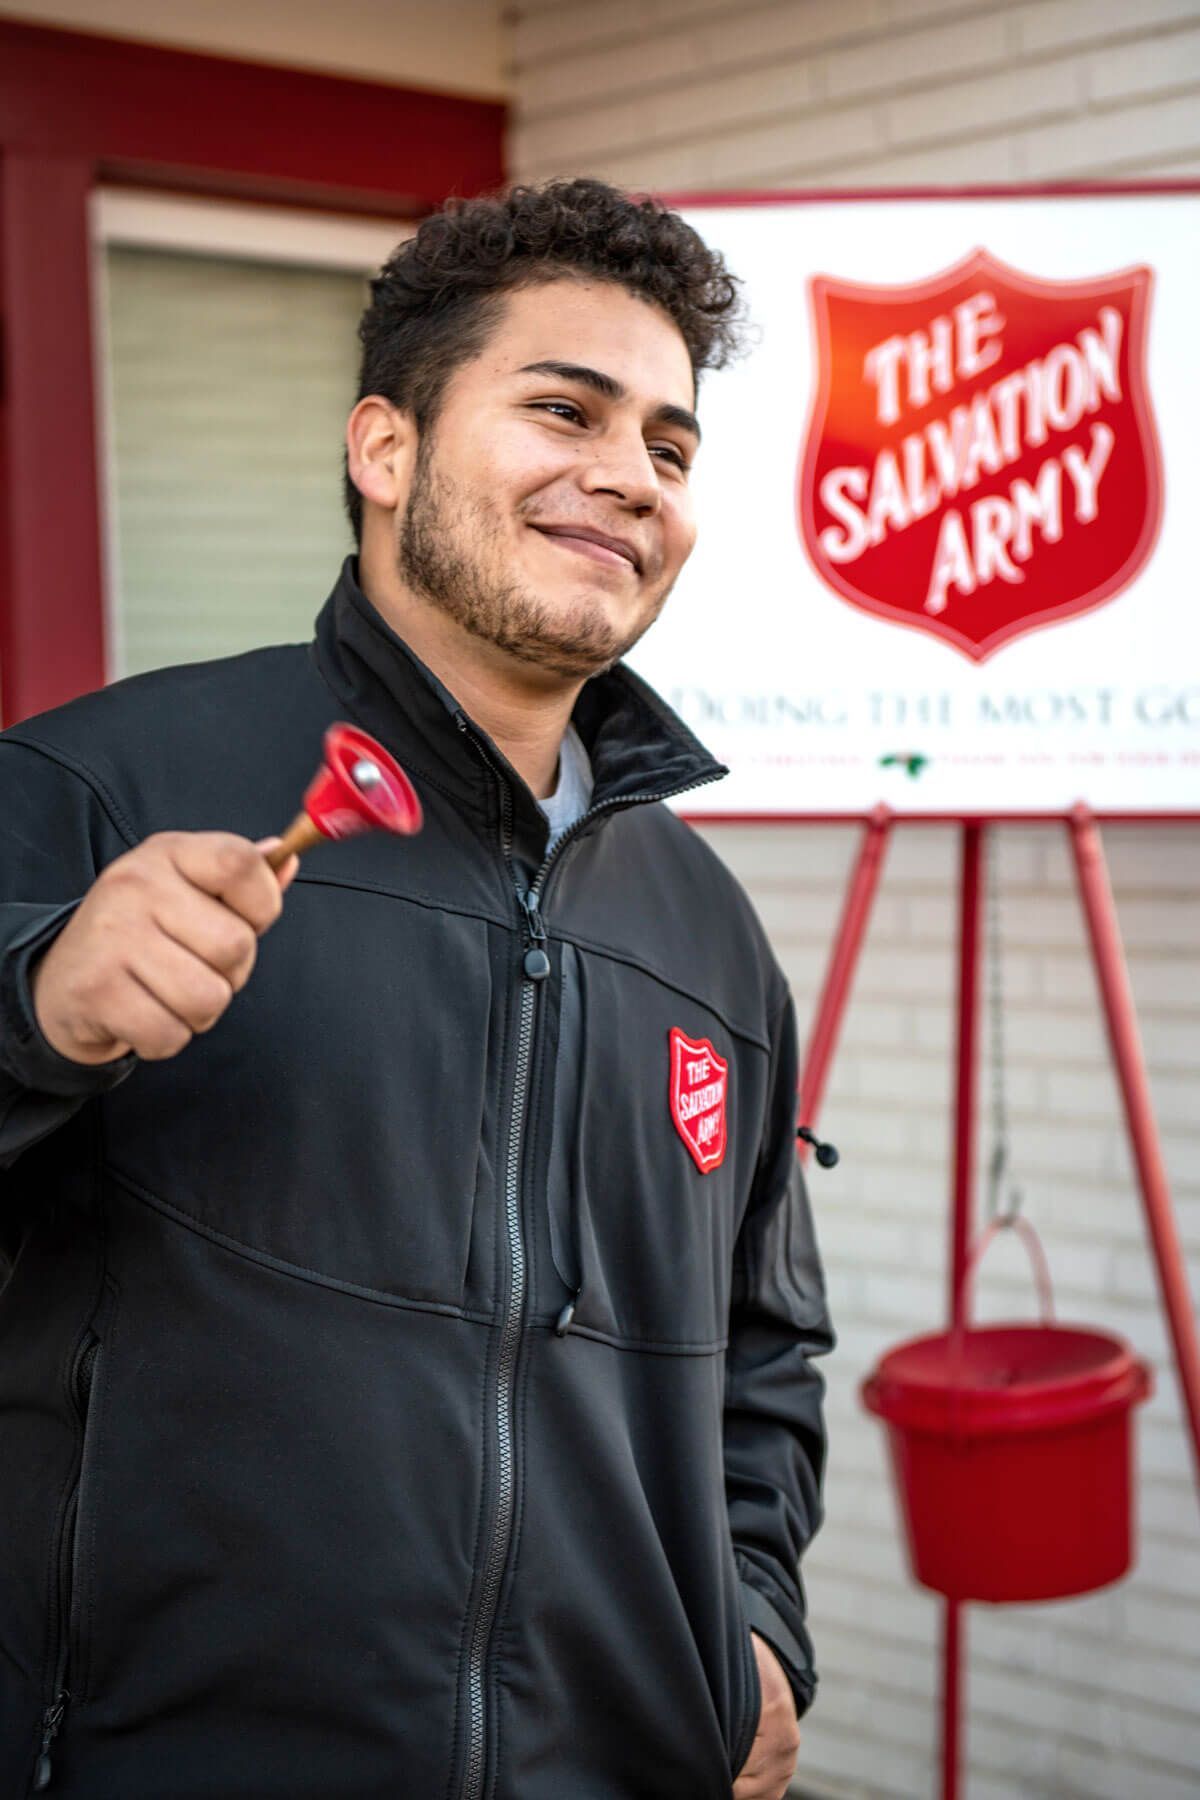 young man ringing bell for charity